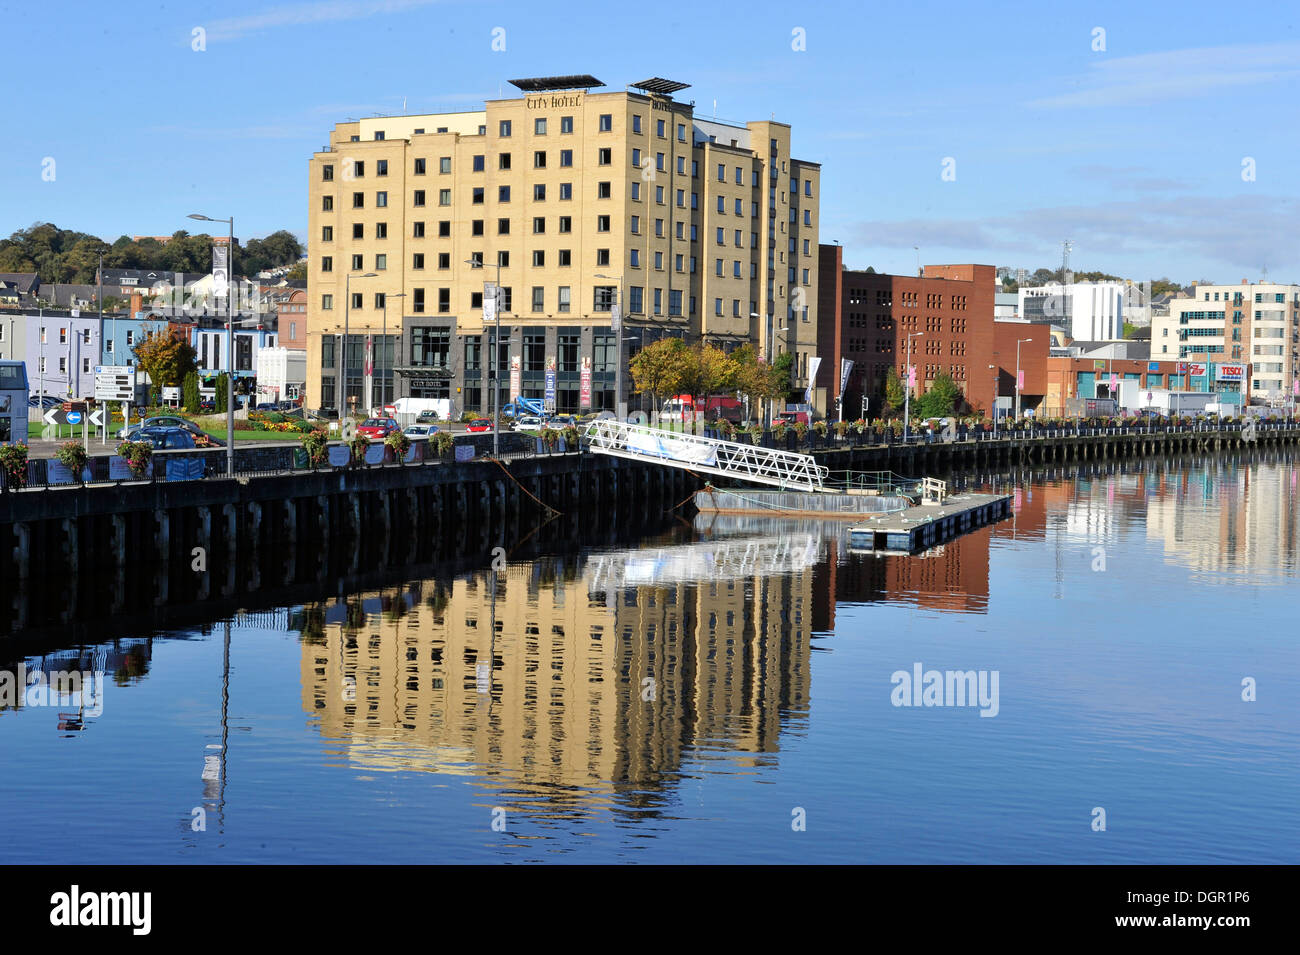 The City Hotel, Queen's Quay, Derry, Londonderry, Northern Ireland, UK Stock Photo